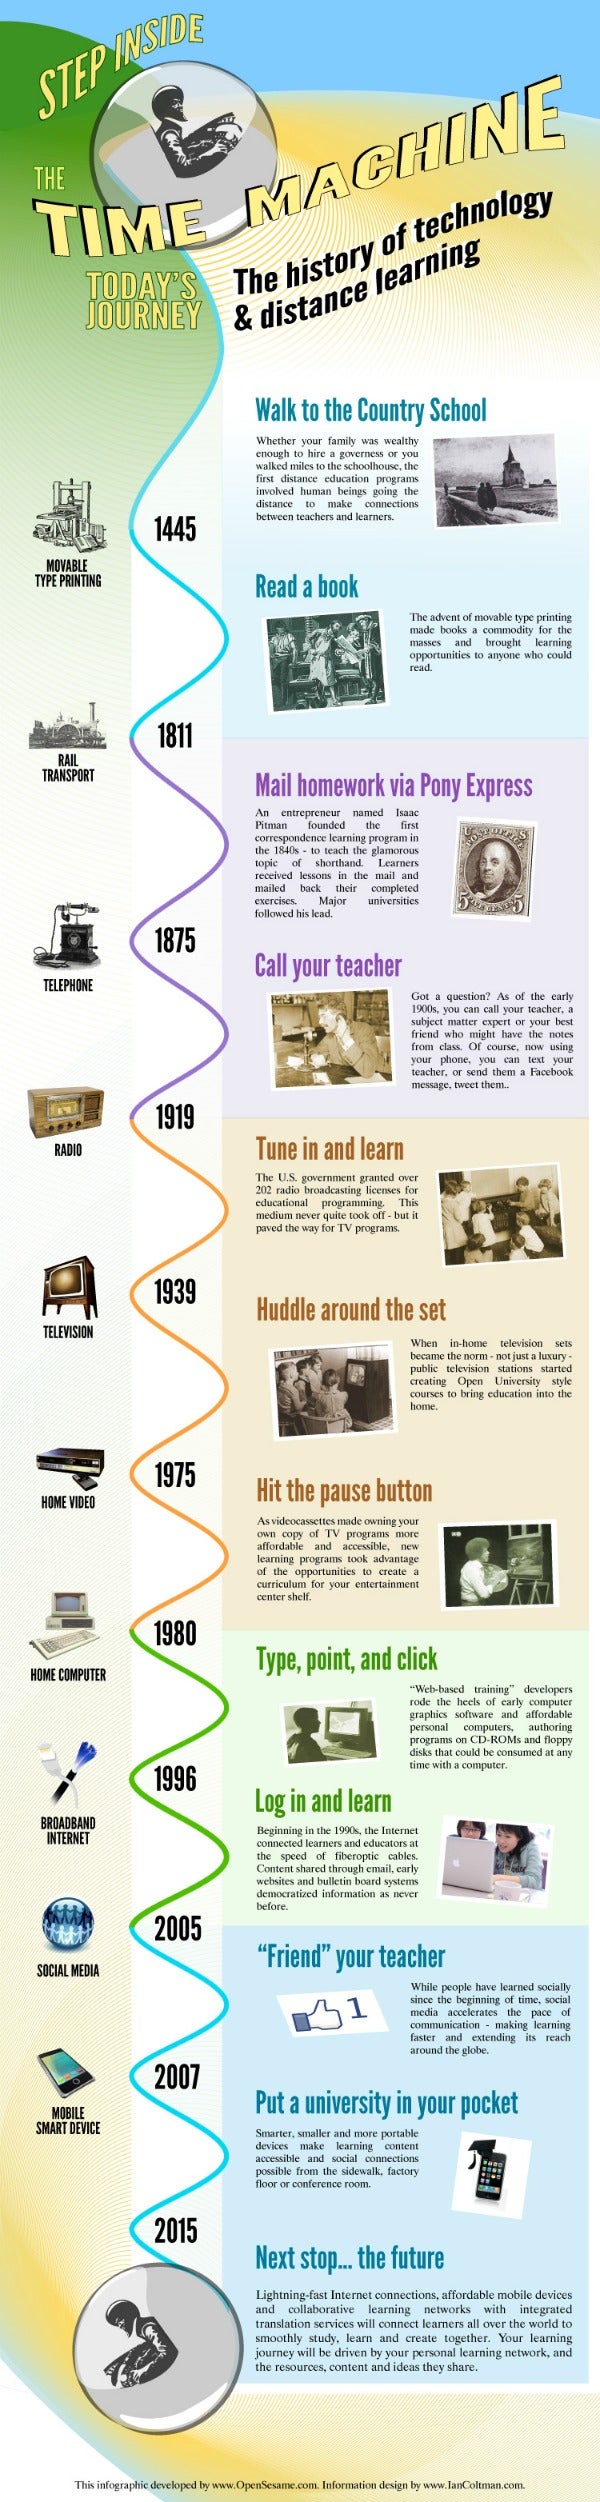 The History of Technology and Distance Learning